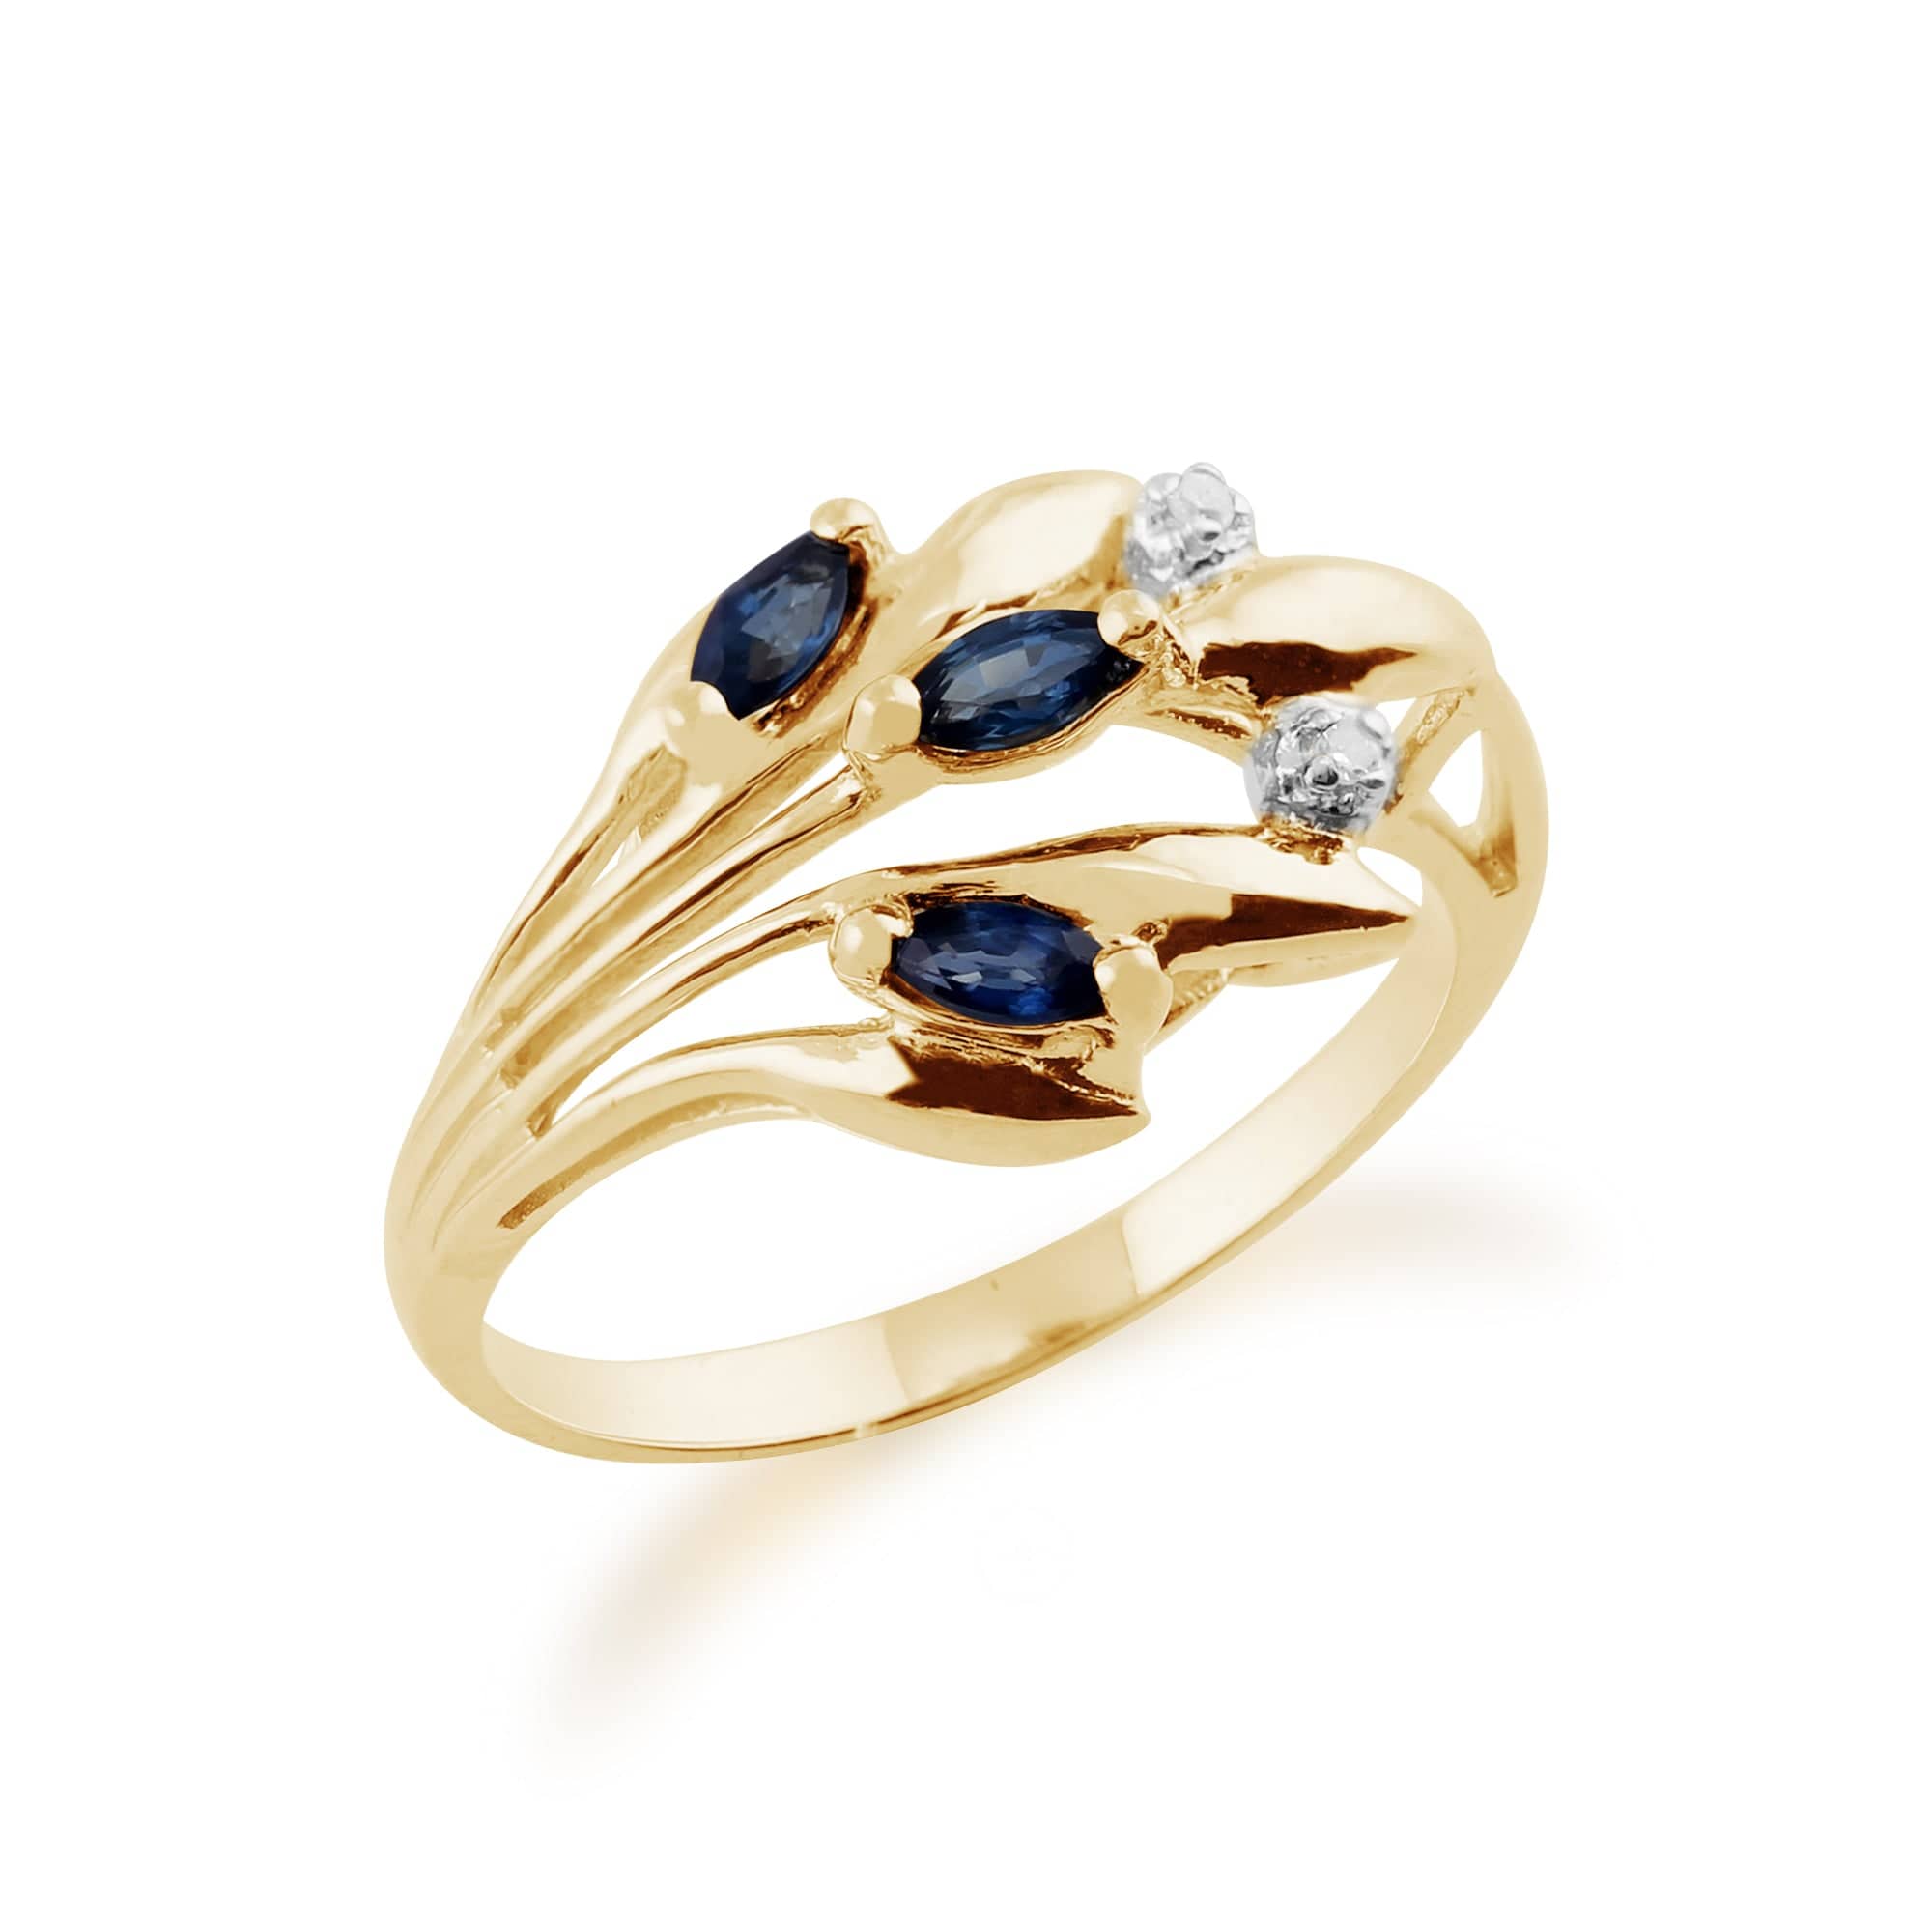 Floral 0.22ct Marquise Sapphire & Diamond Ring in 9ct Yellow Gold